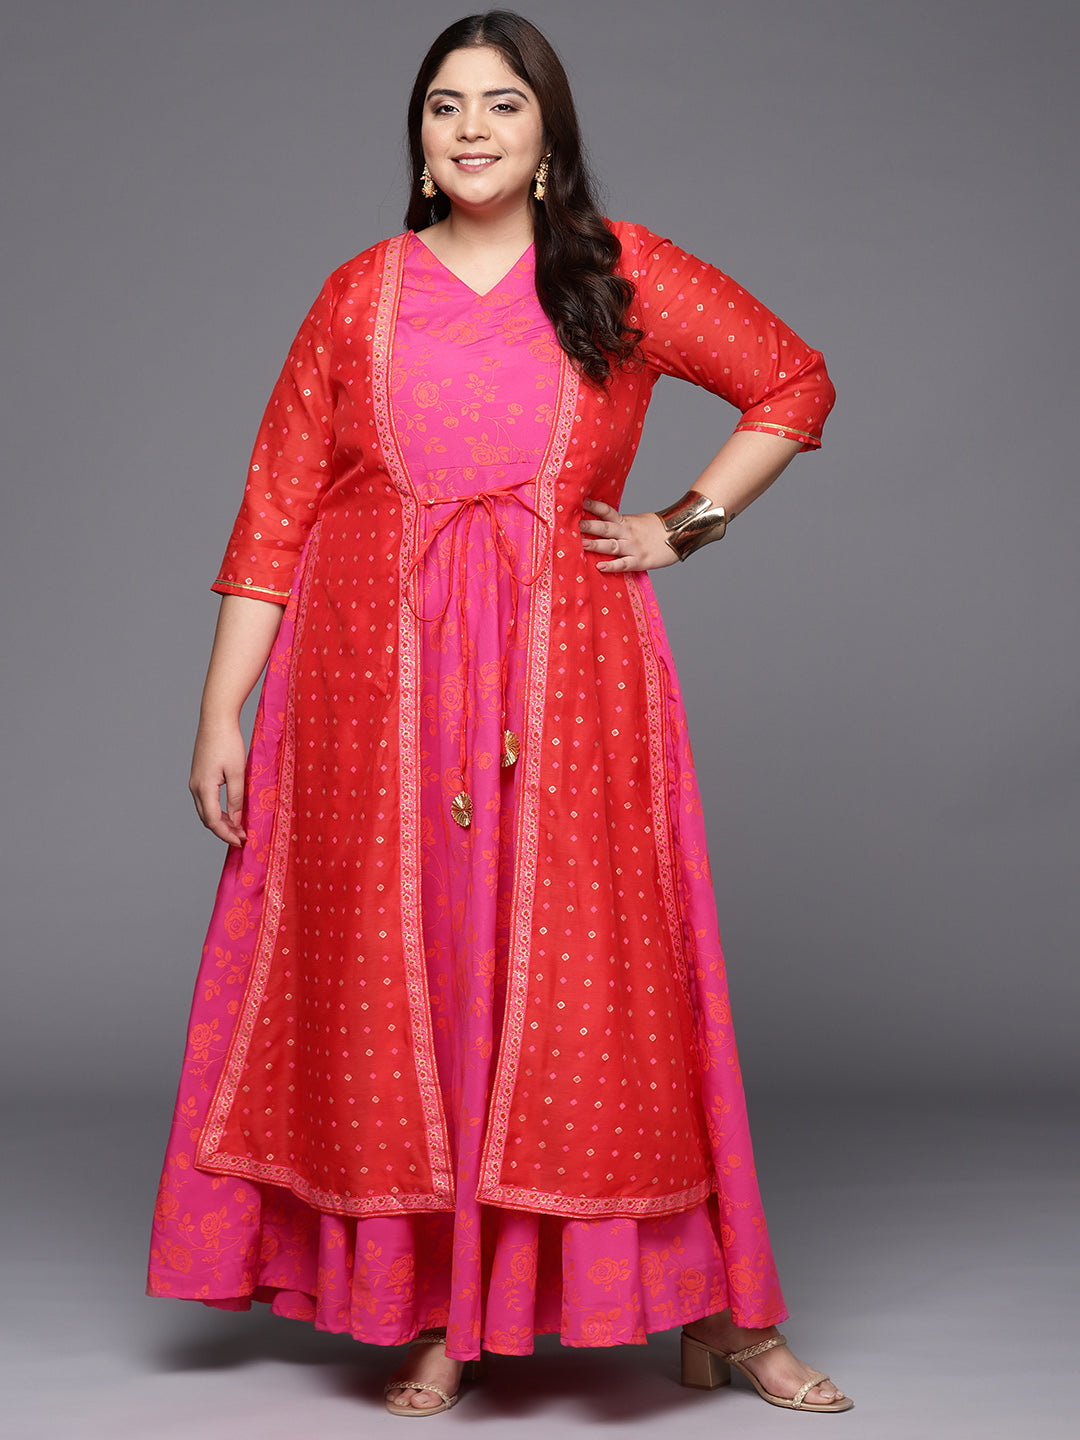 Women's Traditional Wear Ethnic Dress - A Plus By Ahalyaa